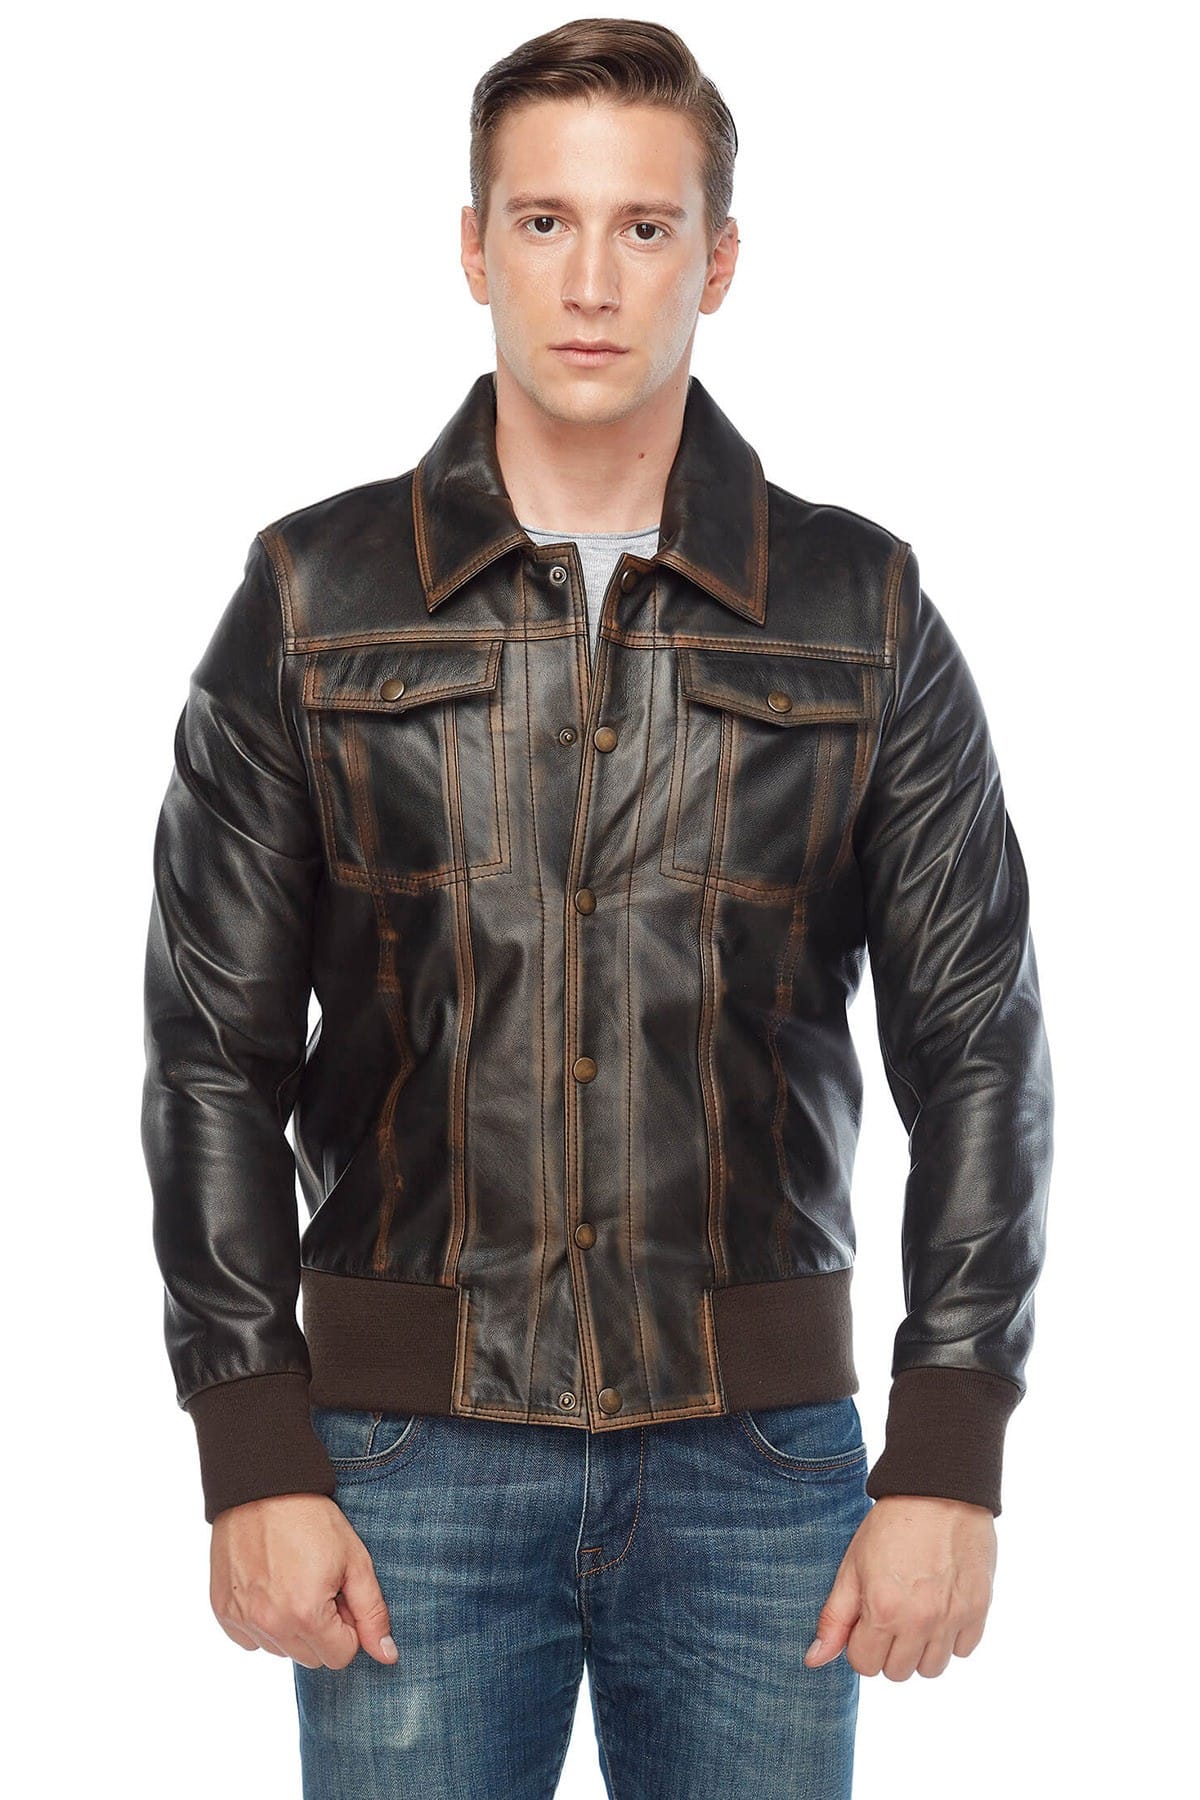 Will Chalker Men's 100 % Real Brown Leather Bomber Real Distressed Jacket